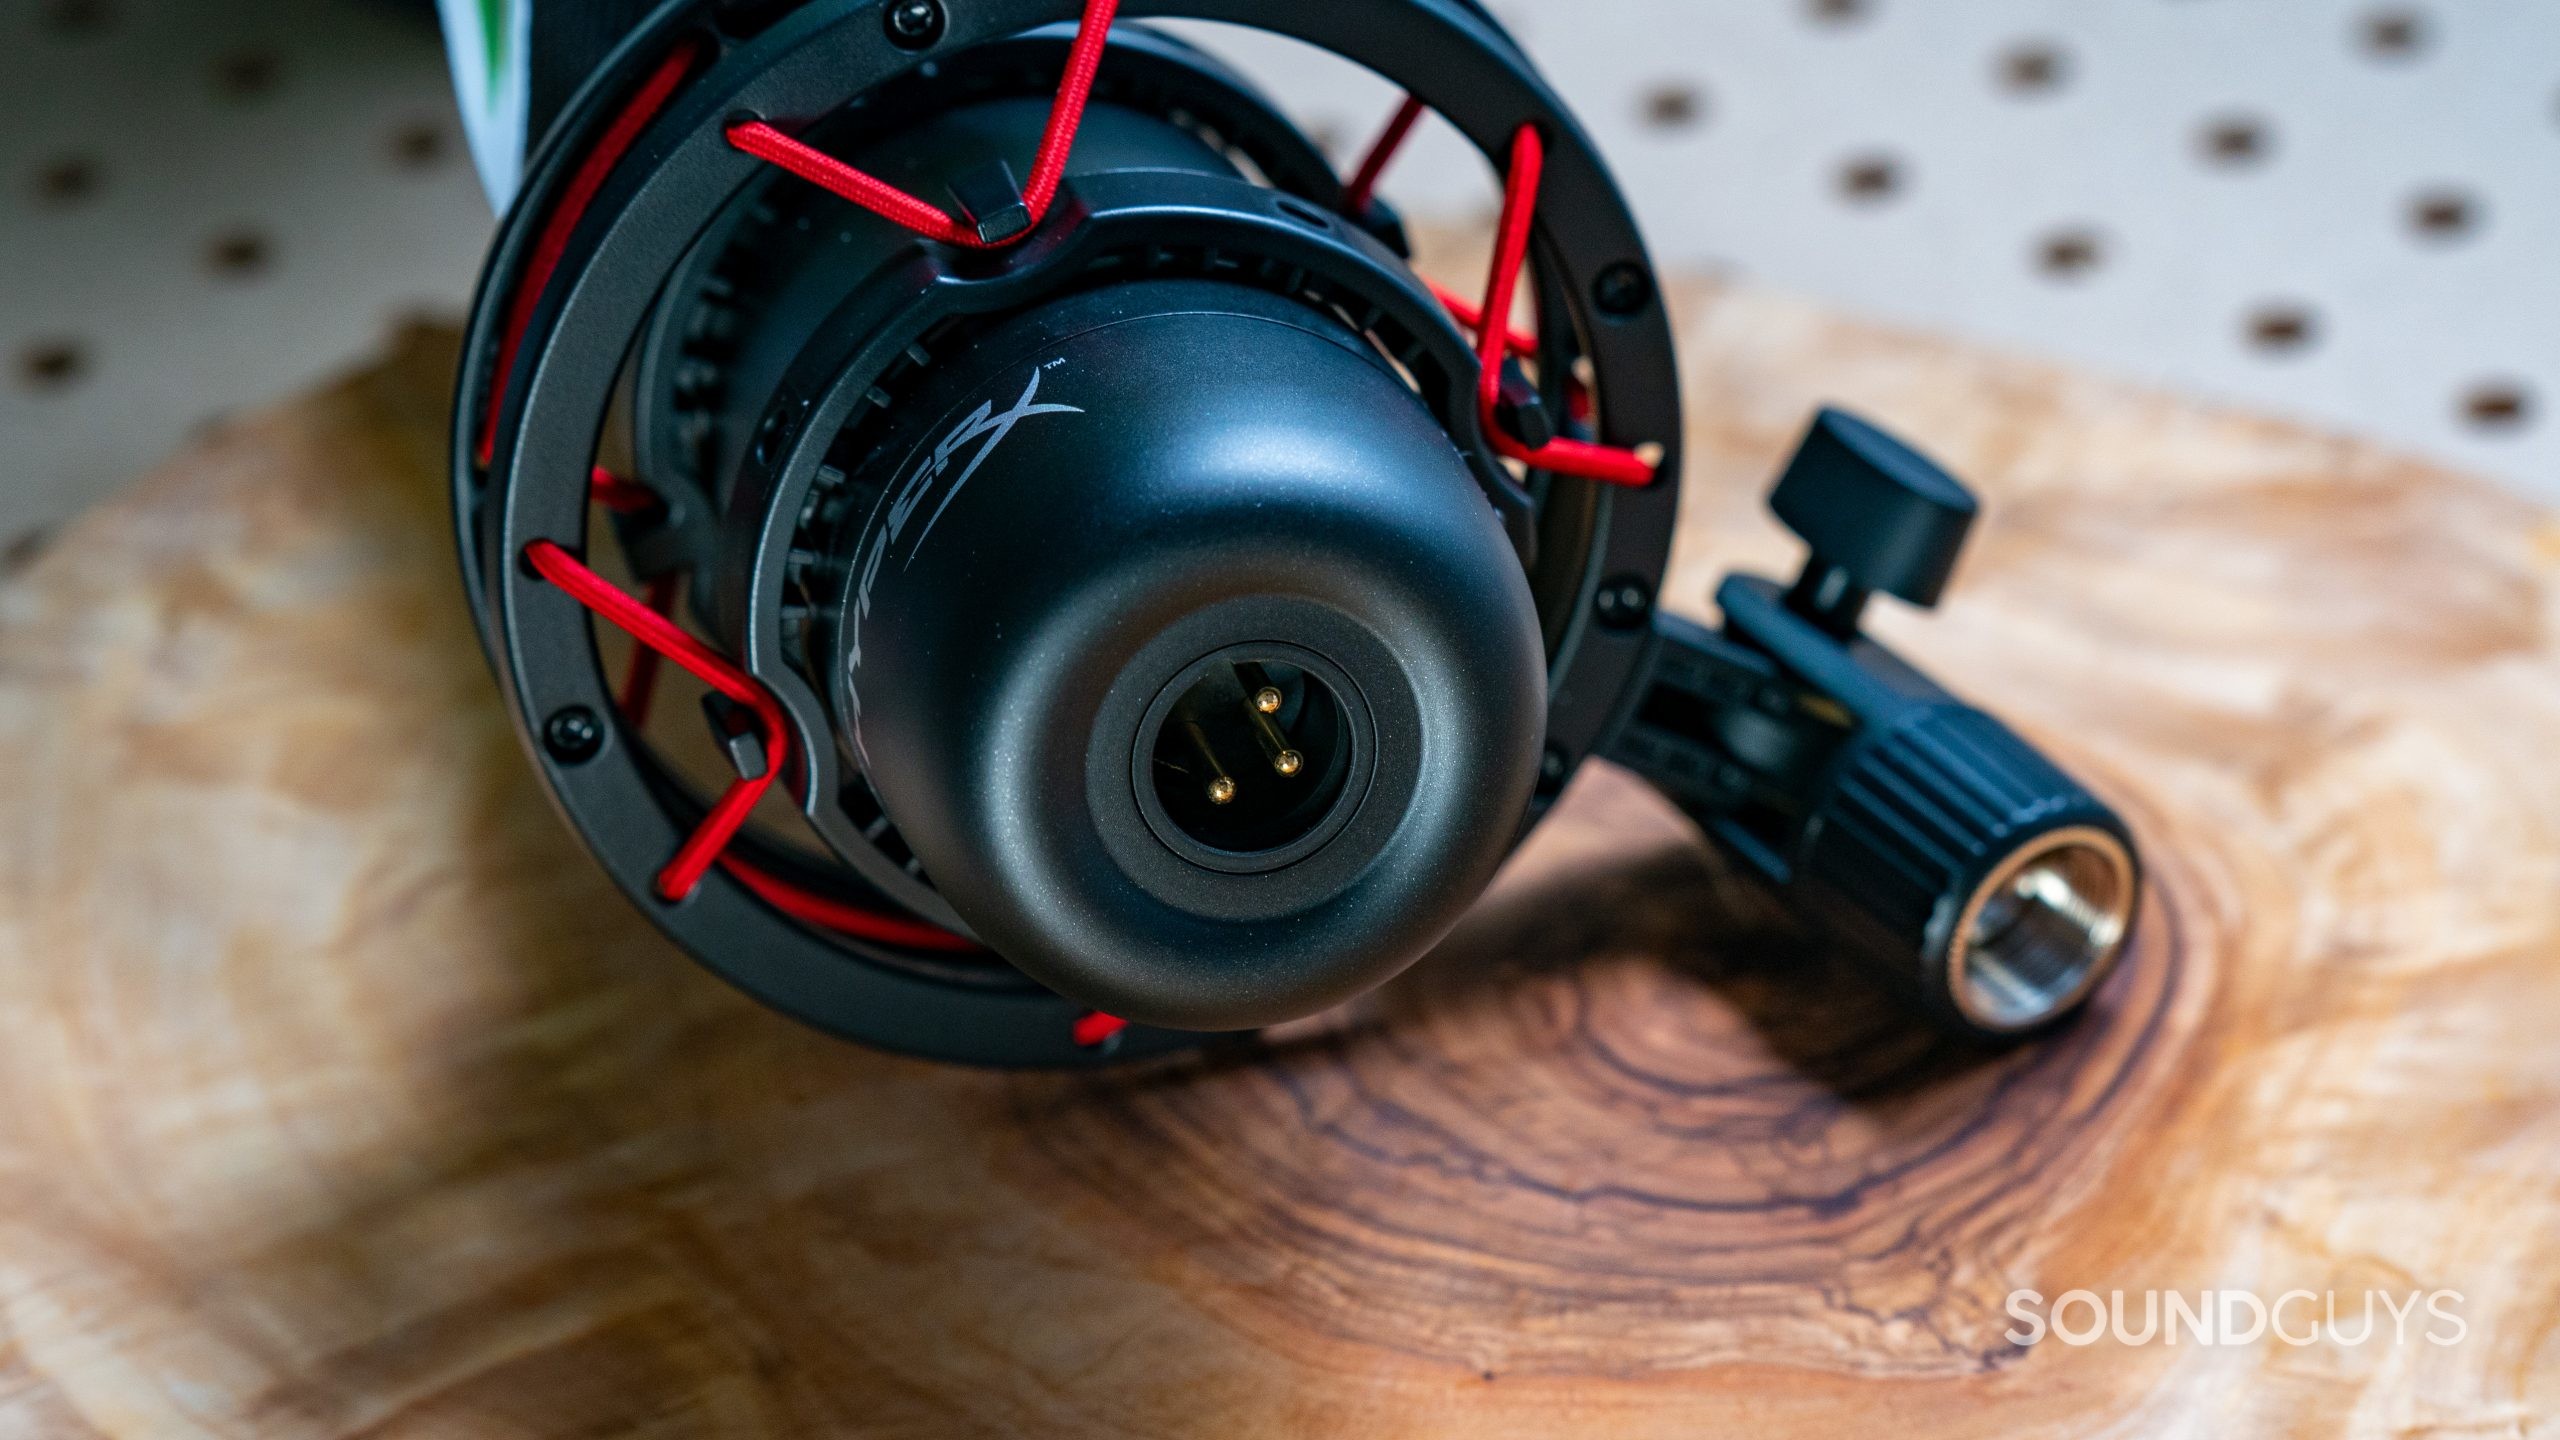 The HyperX ProCast sits on a wooden service, with its XLR port in view.